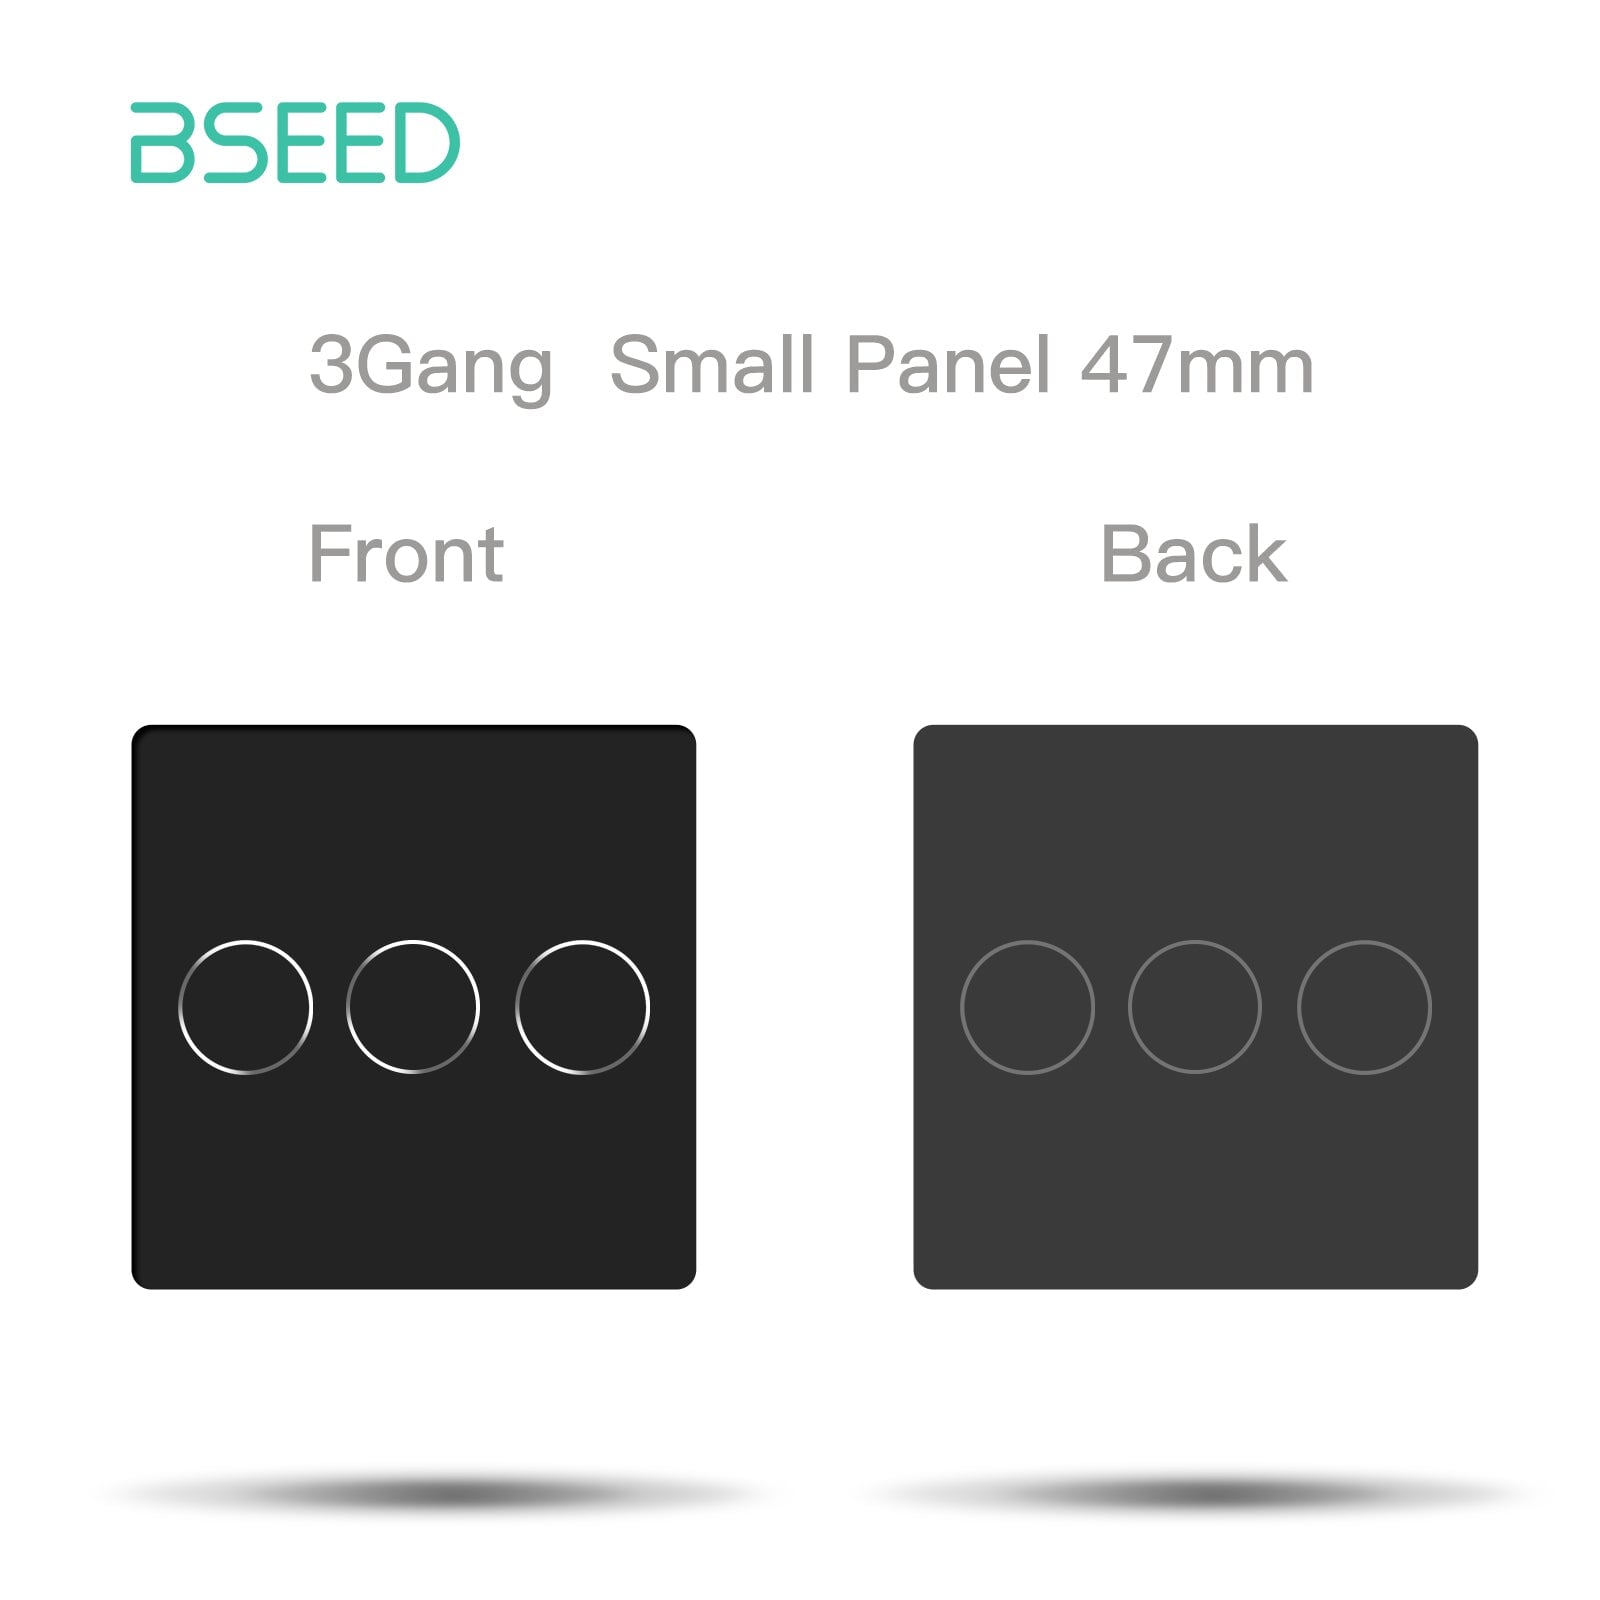 Bseed 47mm Glass Panel Switch DIY Part With Or Without Icon Bseedswitch Black Touch 3Gang Switch icon Panel 